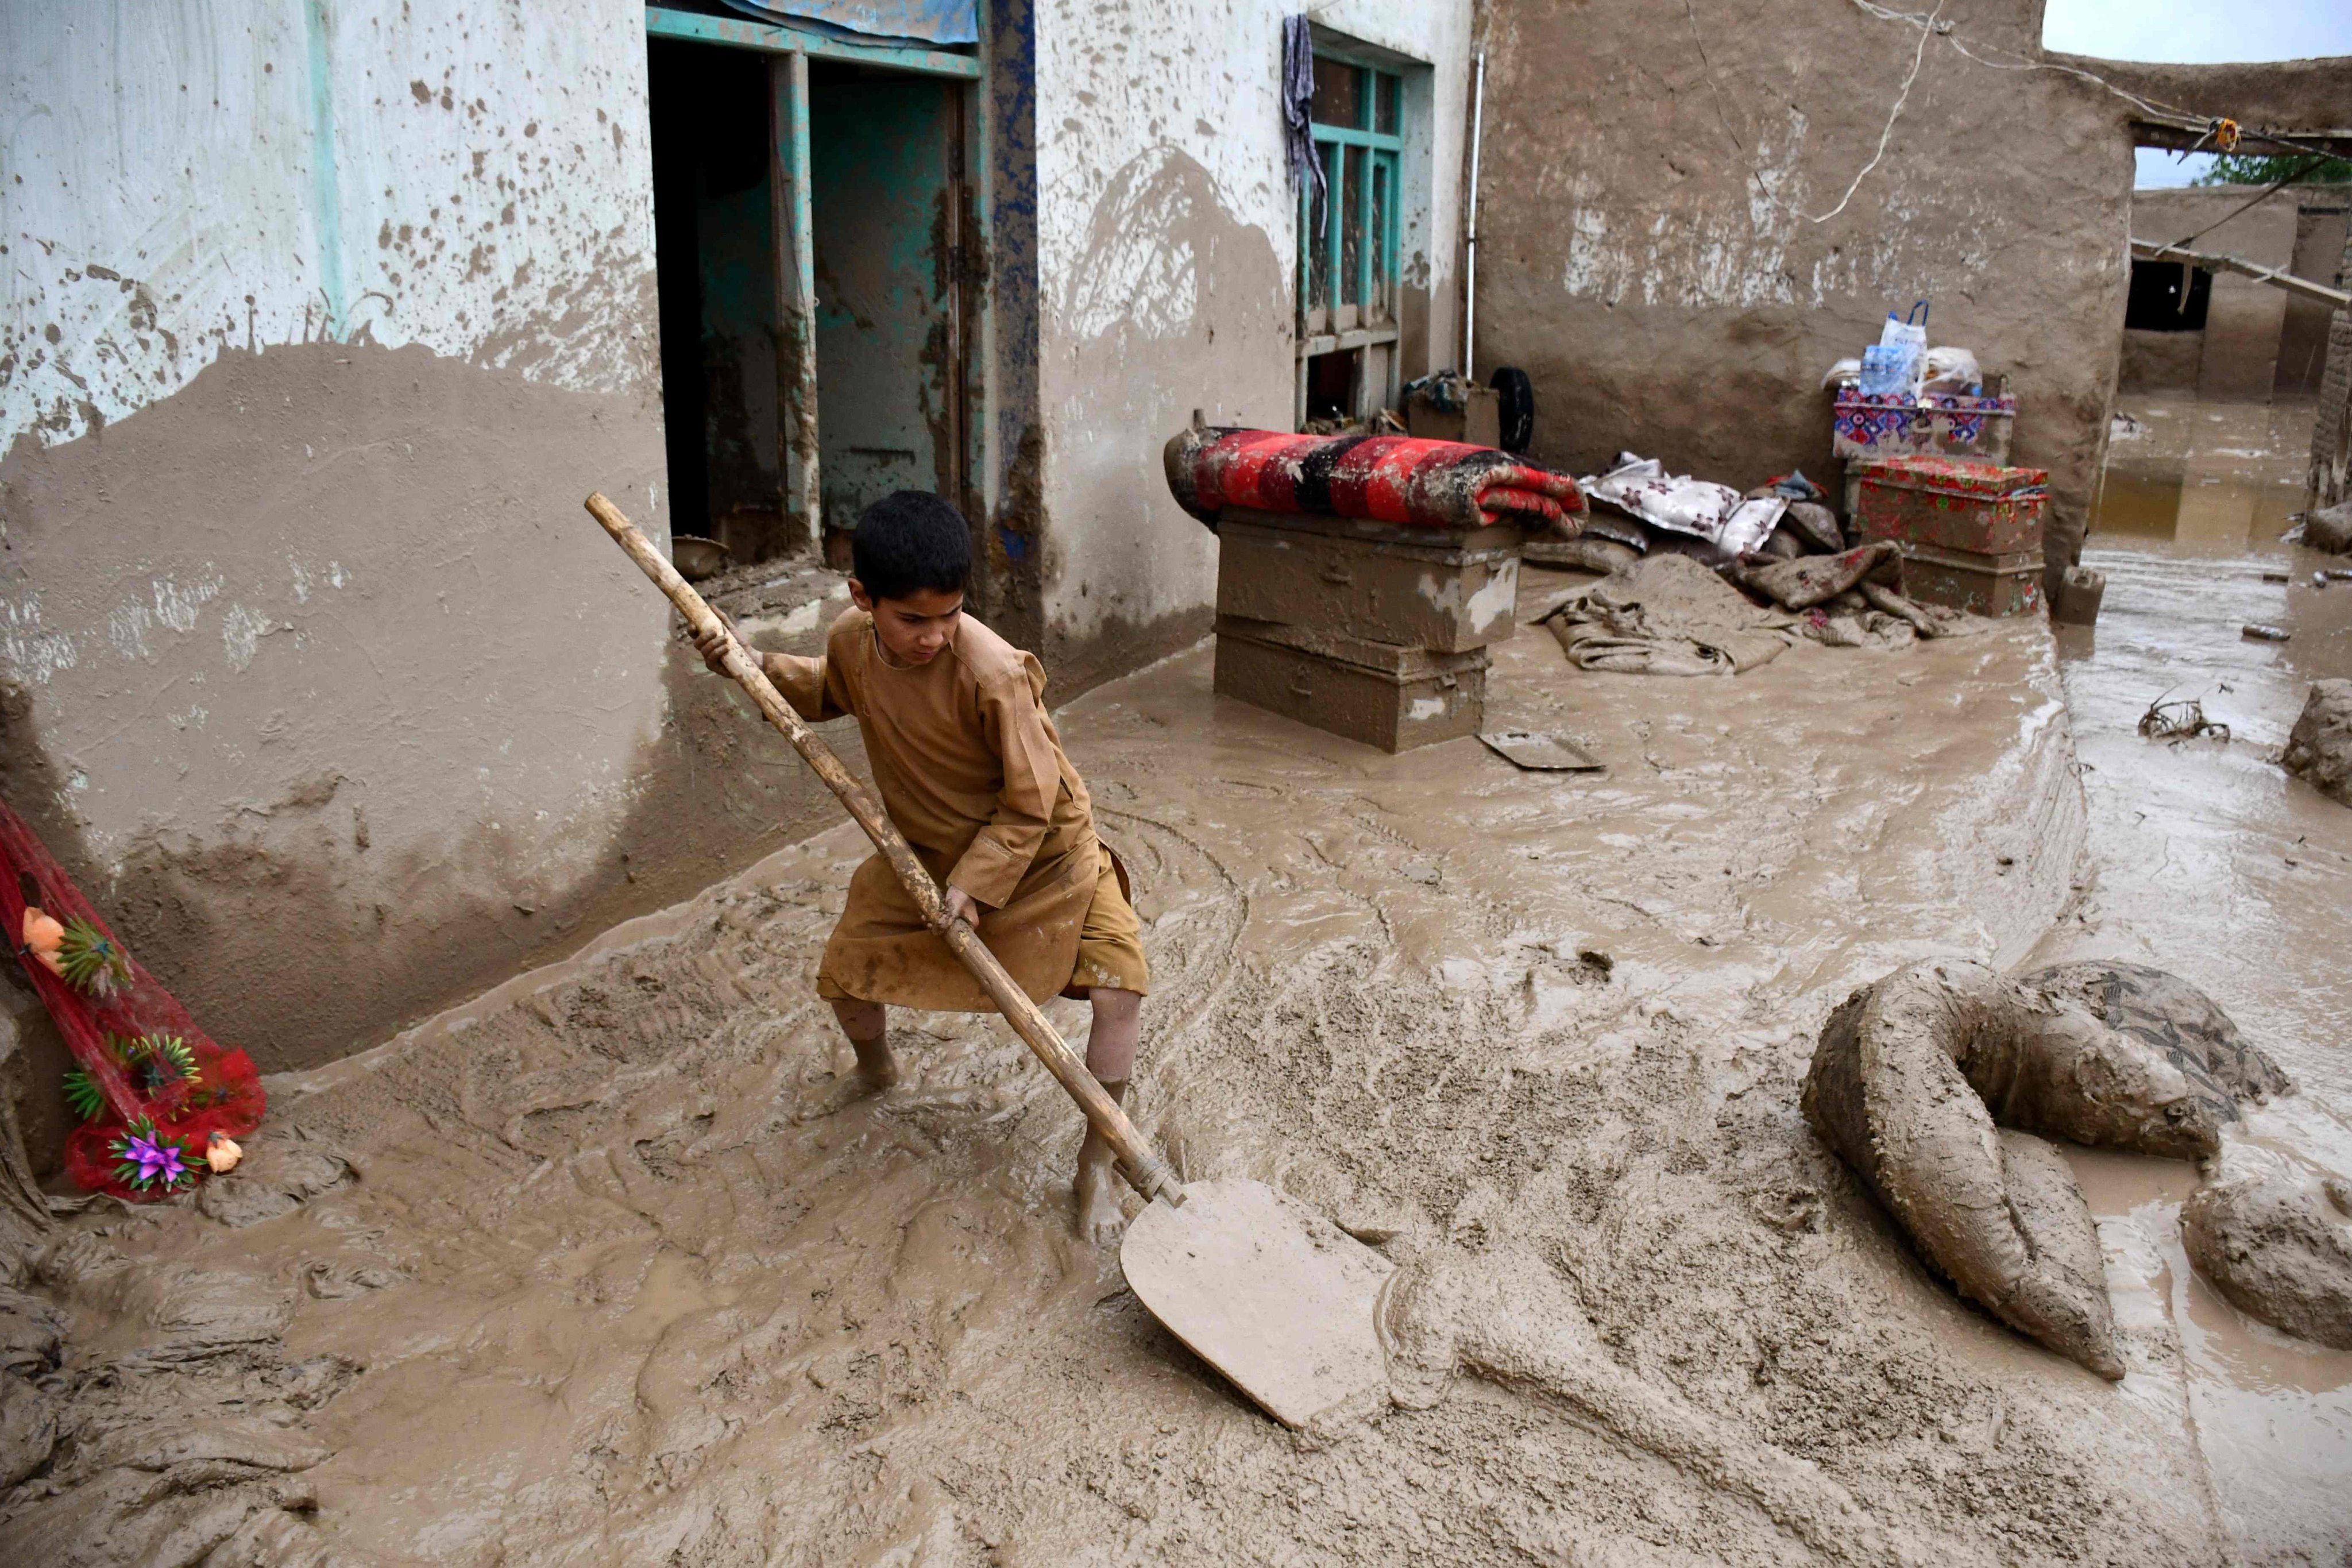 An Afghan boy shovels mud from the courtyard of a house following flash floods after heavy rainfall at a village in Baghlan-e-Markazi district of Baghlan province on Saturday. Photo: AFP